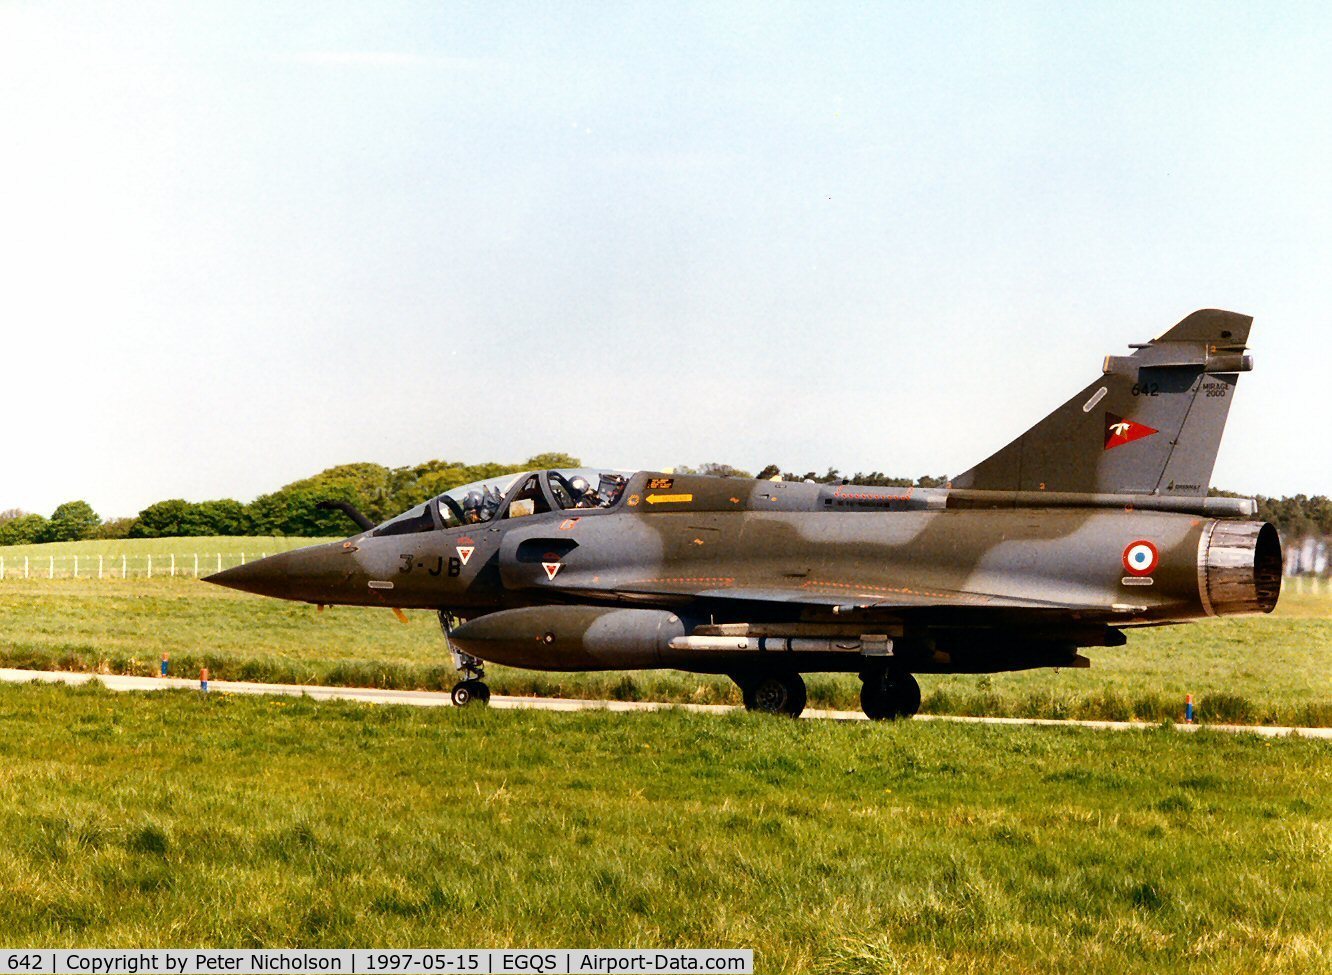 642, Dassault Mirage 2000D C/N Not found 642, Mirage 2000D, callsign French Air Force 7320 Bravo, of EC 02.003 taxying to the active runway at Lossiemouth in May 1997.